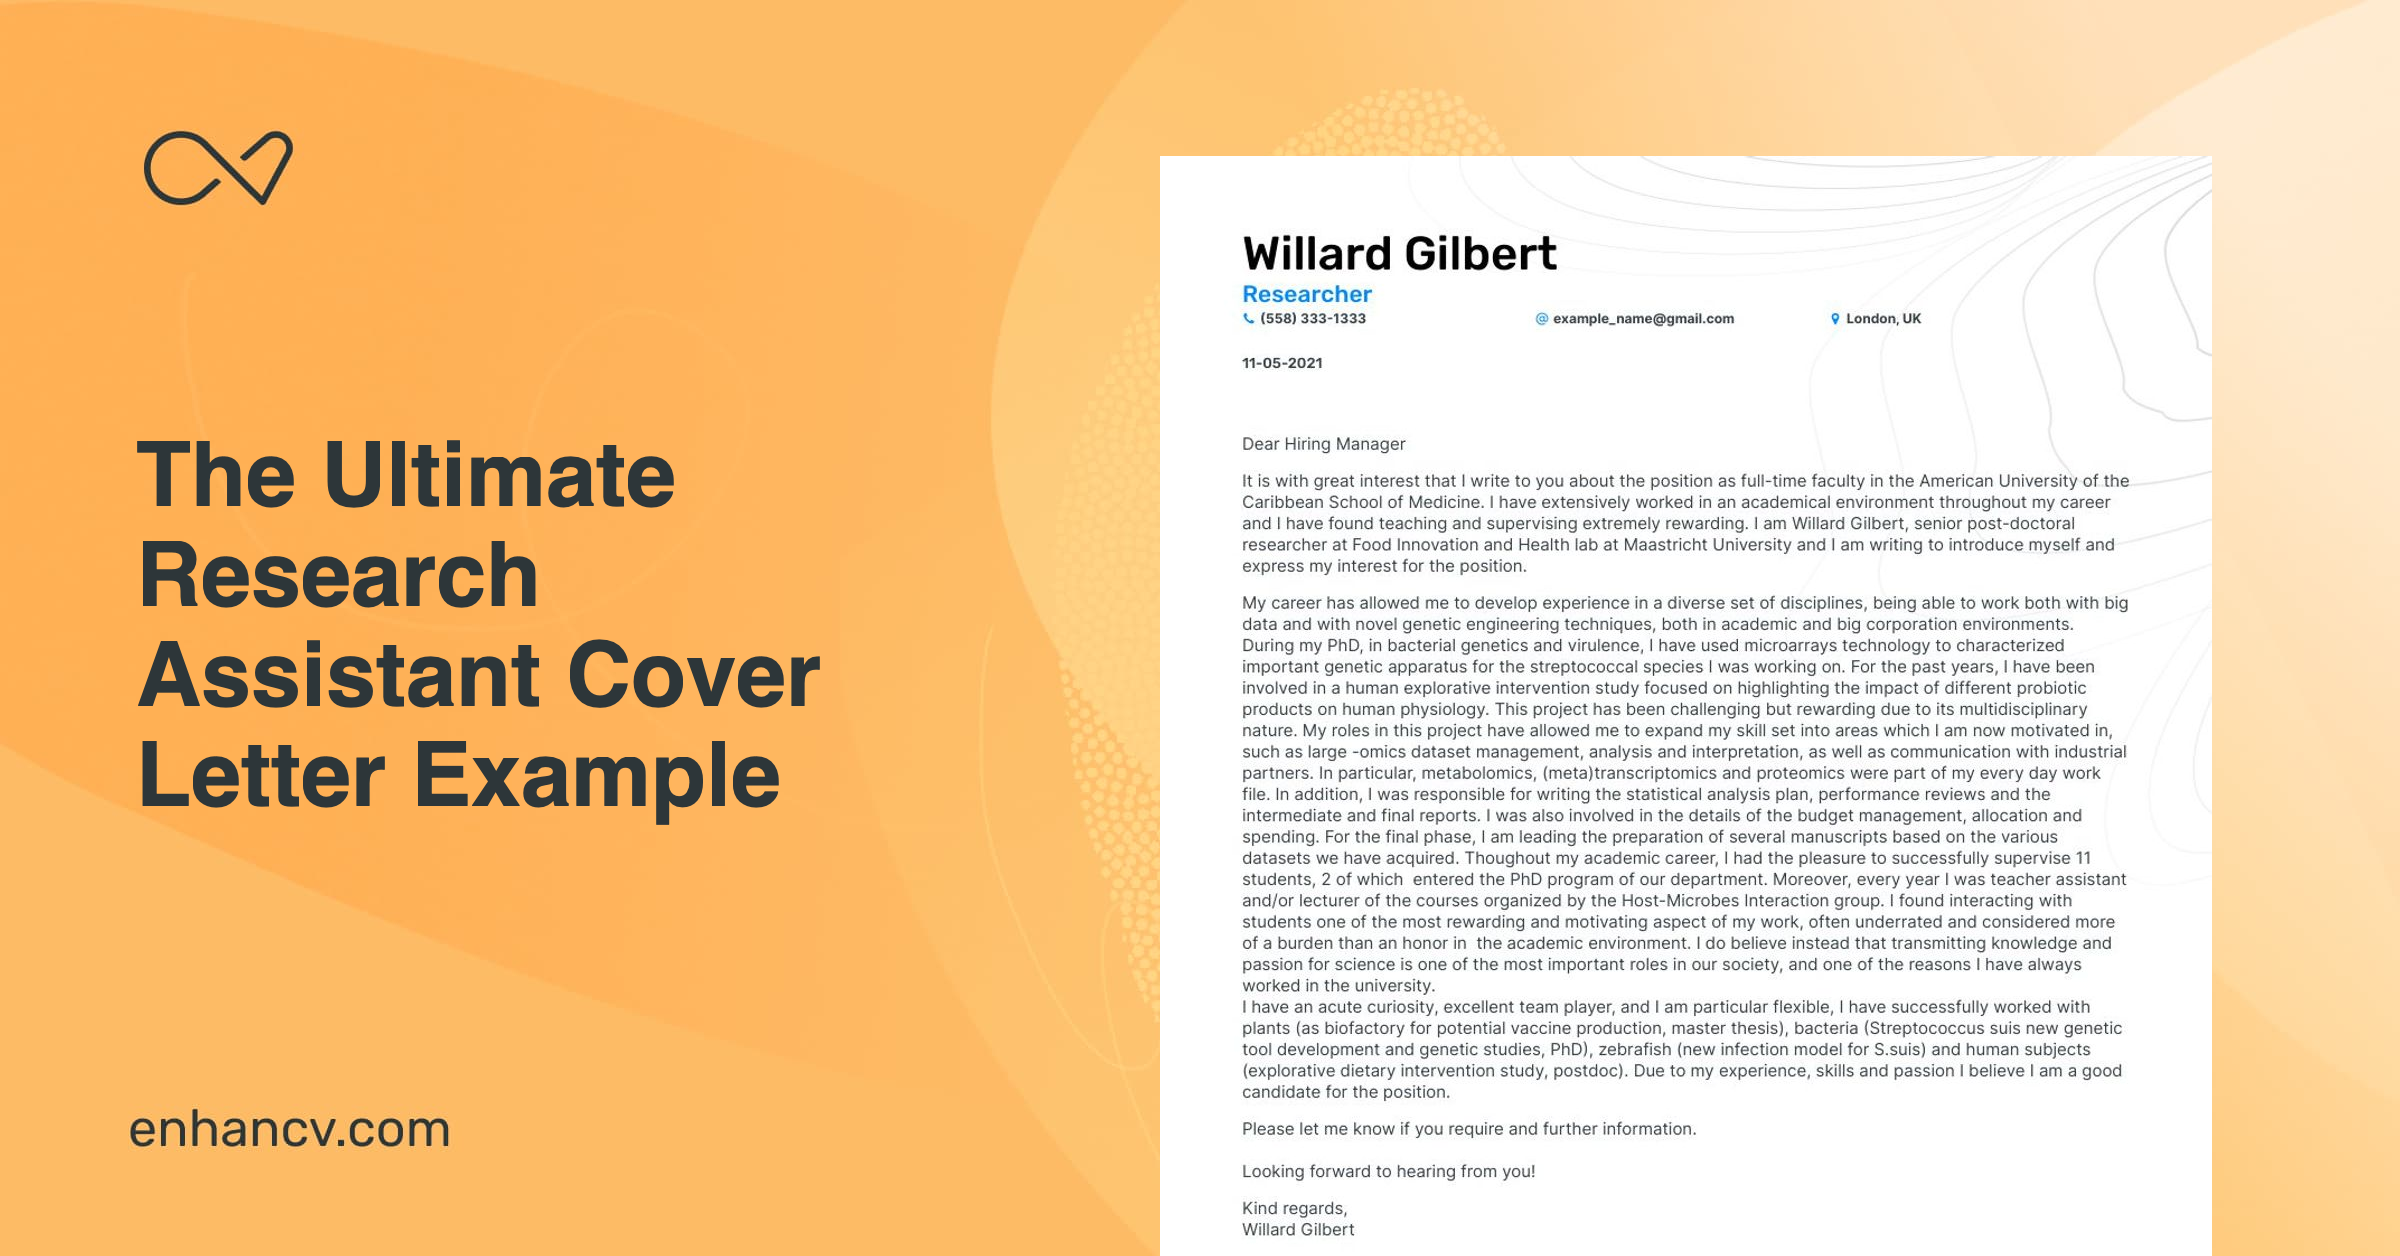 Research Assistant Cover Letter Example (Free Guide)